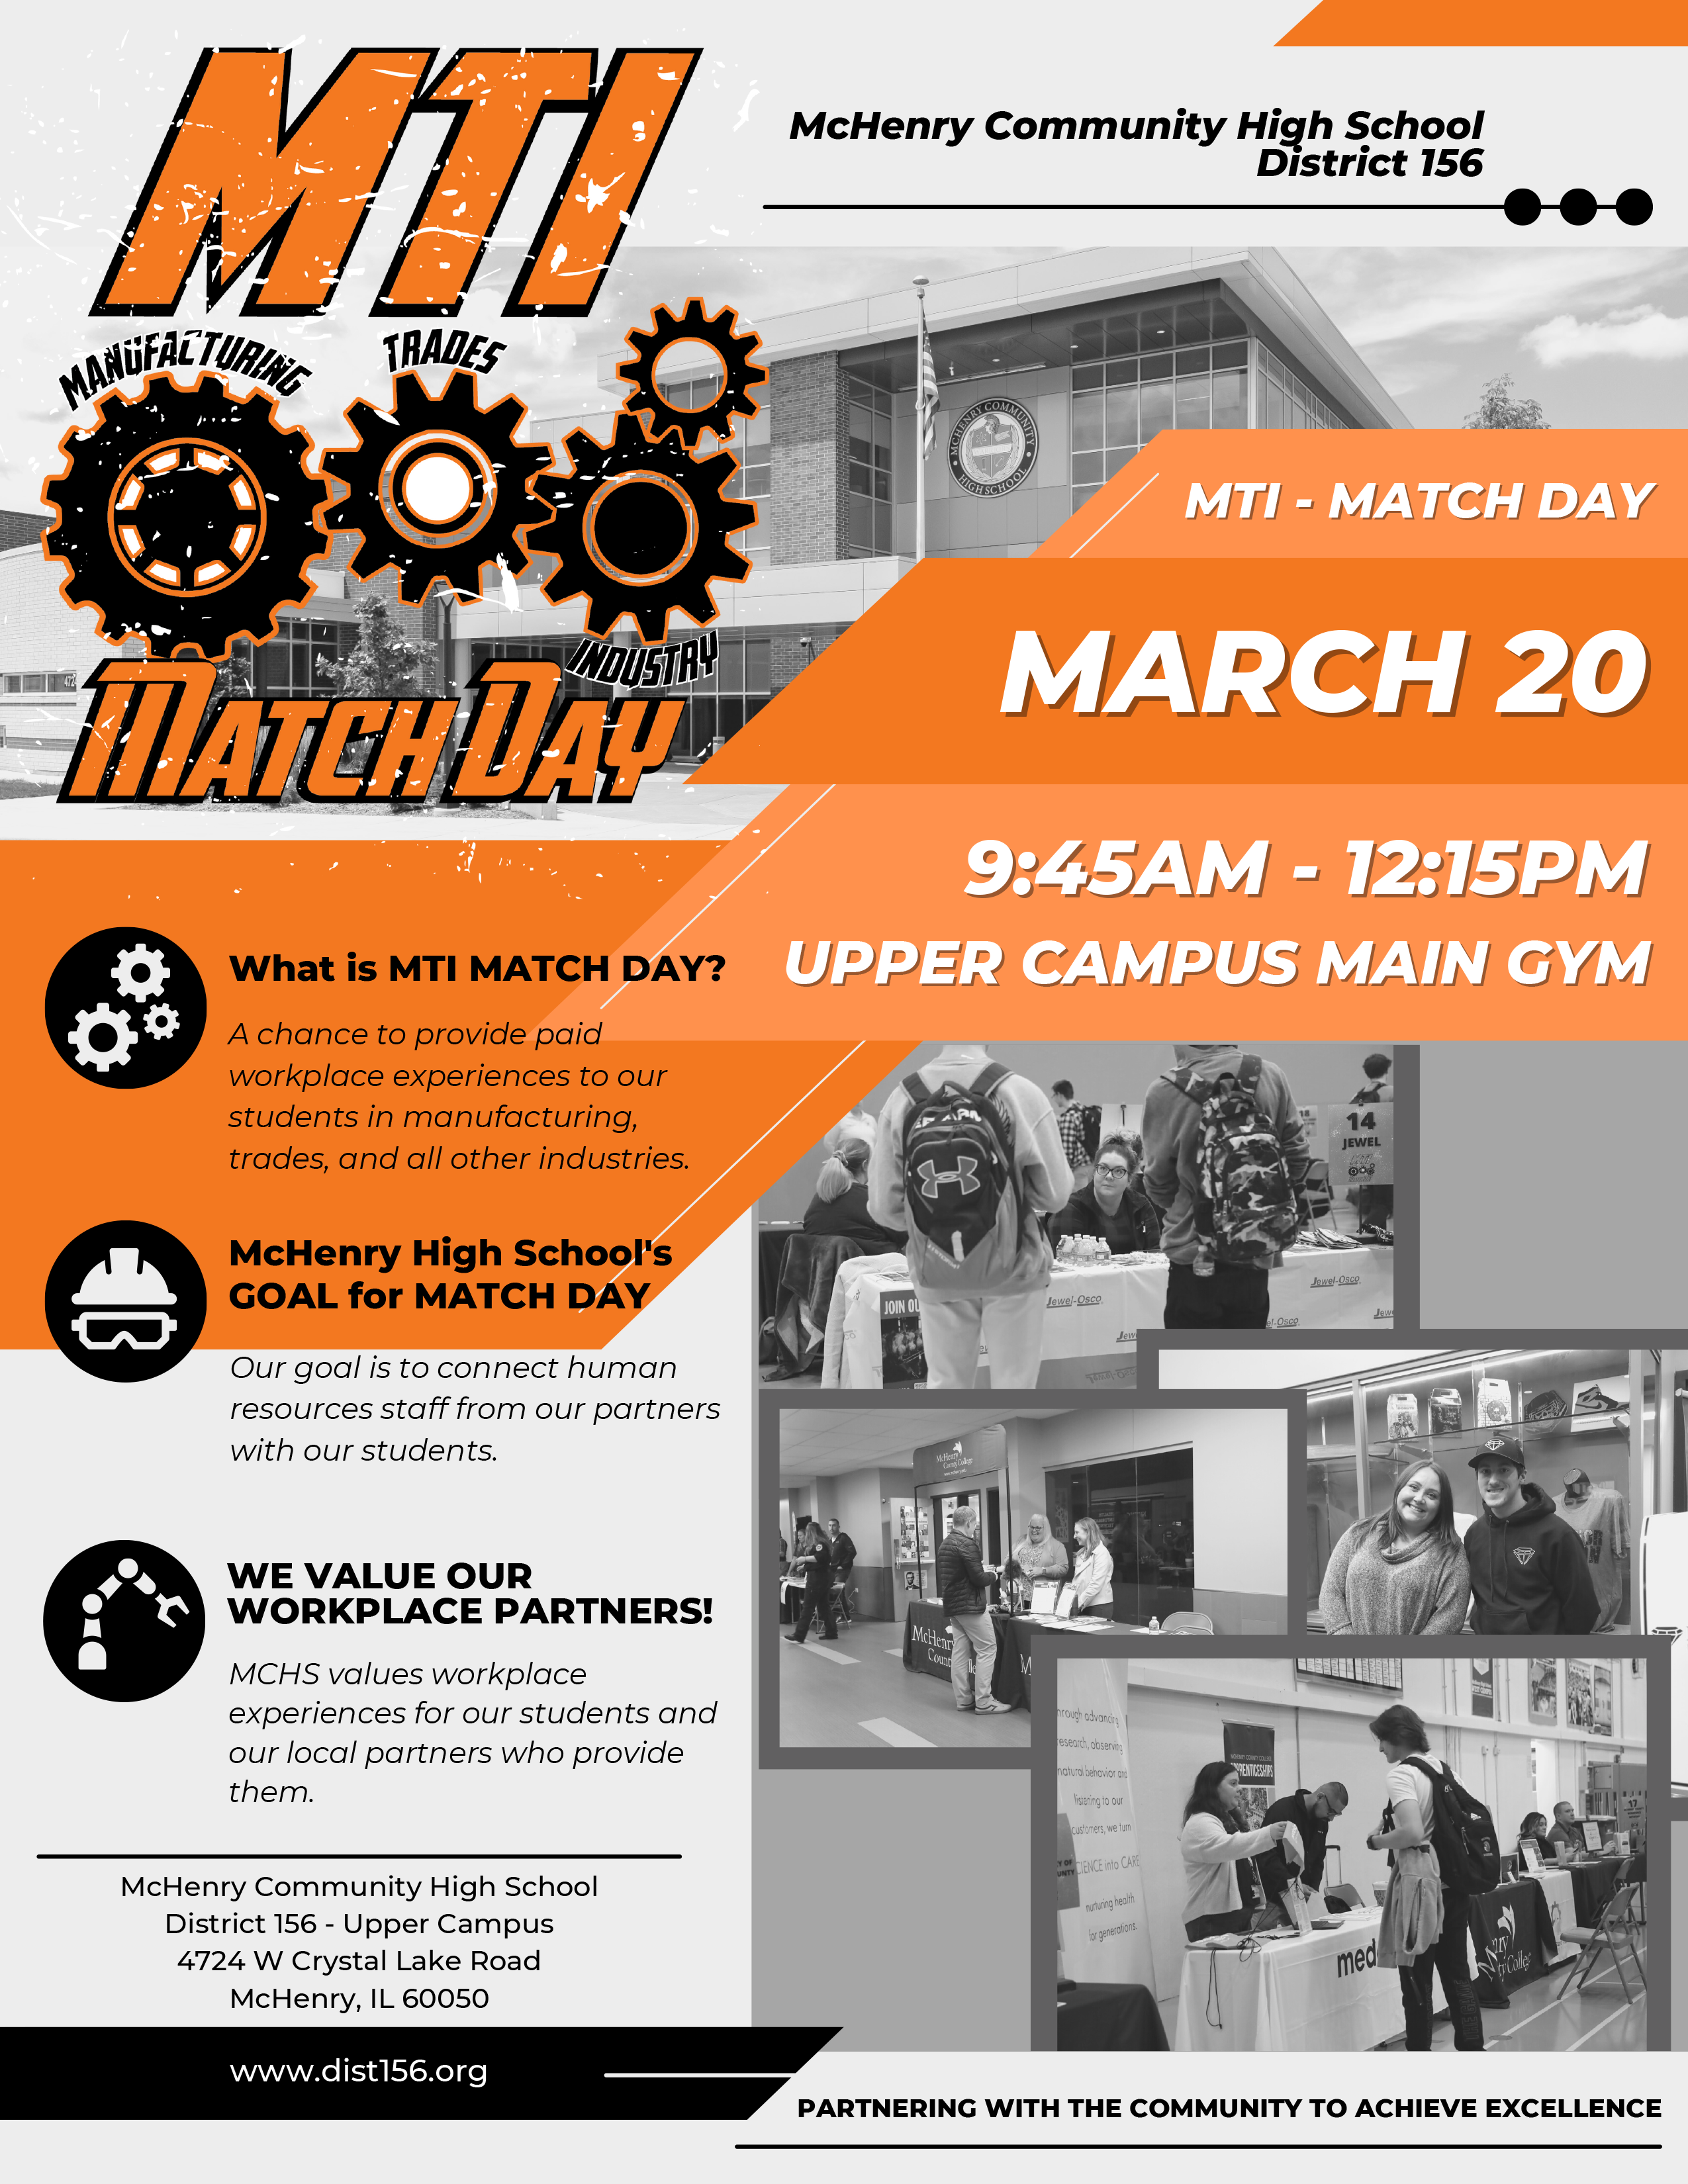 McHenry Community High School District 156 Manufacturing, Trades, Industry Match Day. MTI Match Day March 20 9:45 a.m.-12:15 p.m. Upper Campus Main Gym. What is a MTI Match Day? A chance to provide paid workplace experiences to our students in manufacturing, trades and all other industries. McHenry High School's Goal for Match Day: Our goal is tonnect human resources staff from our partners with our students. We value our workplace partners!: MCHS values workplace experiences for our students and our local partners who provide them. McHenry High School District 156: Upper Campus 4724 W. Crystal Lake Road. McHenry, IL 6050 dist156.org Partnering with the community to achieve excellence. 